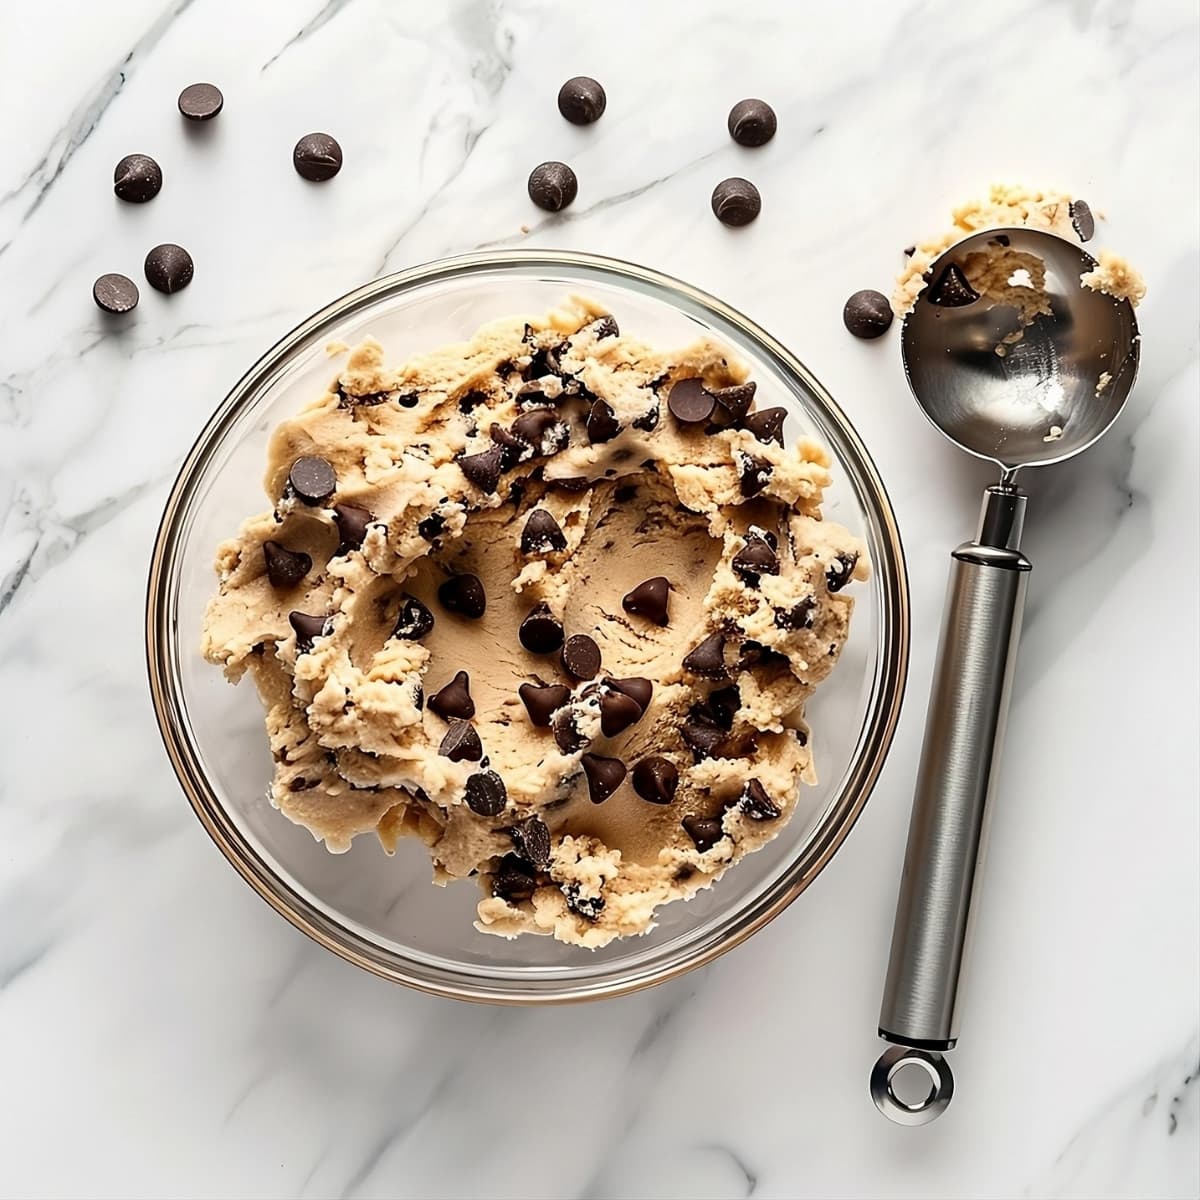 Edible cookie dough with chocolate chips in a glass bowl and an ice cream scoop on the side.